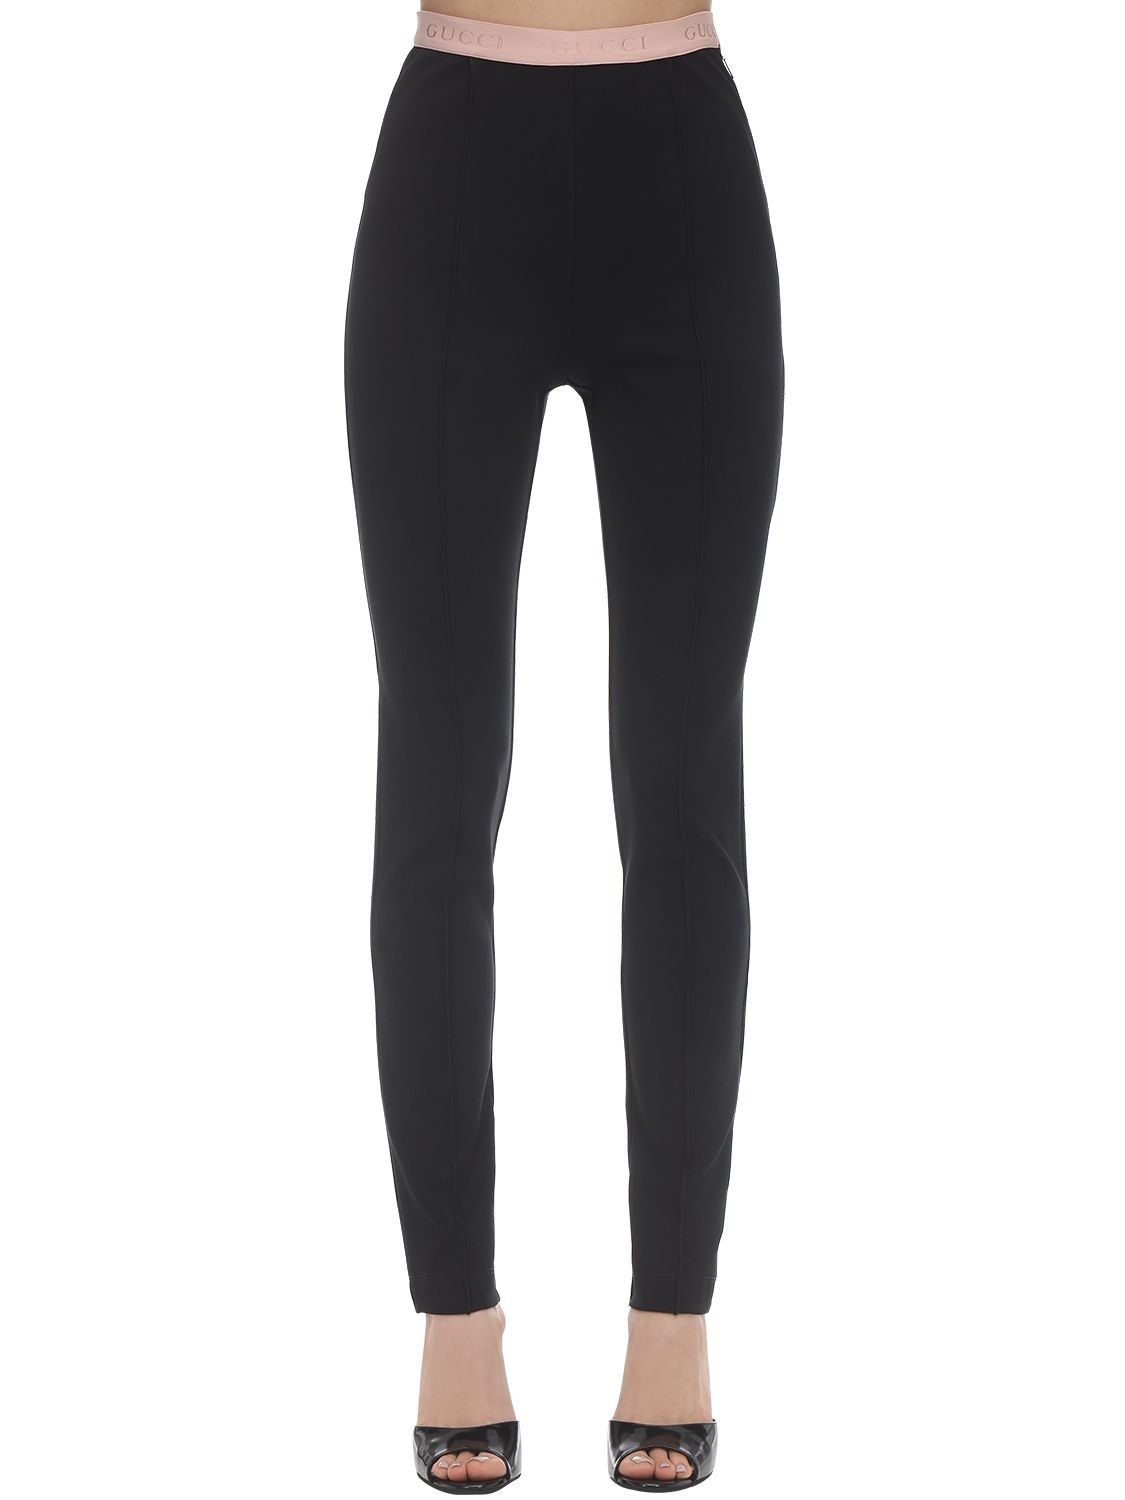 GUCCI COMPACT STRETCH JERSEY LEGGINGS,71I5K1053-MTAYNA2